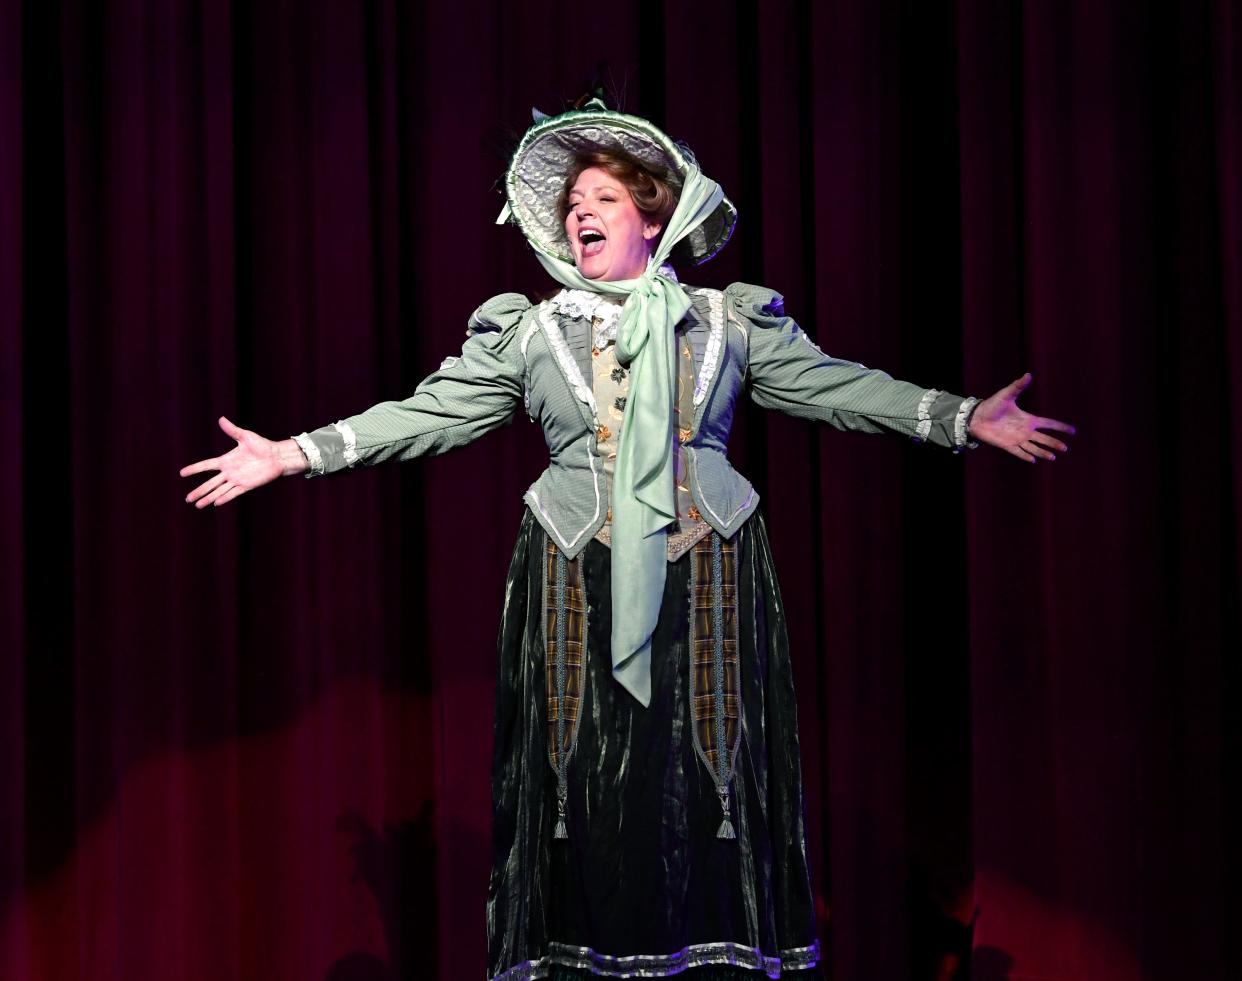 Paige Sproles performs as the title character during rehearsal for "Hello, Dolly!" at the Paramount Theatre. There will be five performances this year over two weekends.